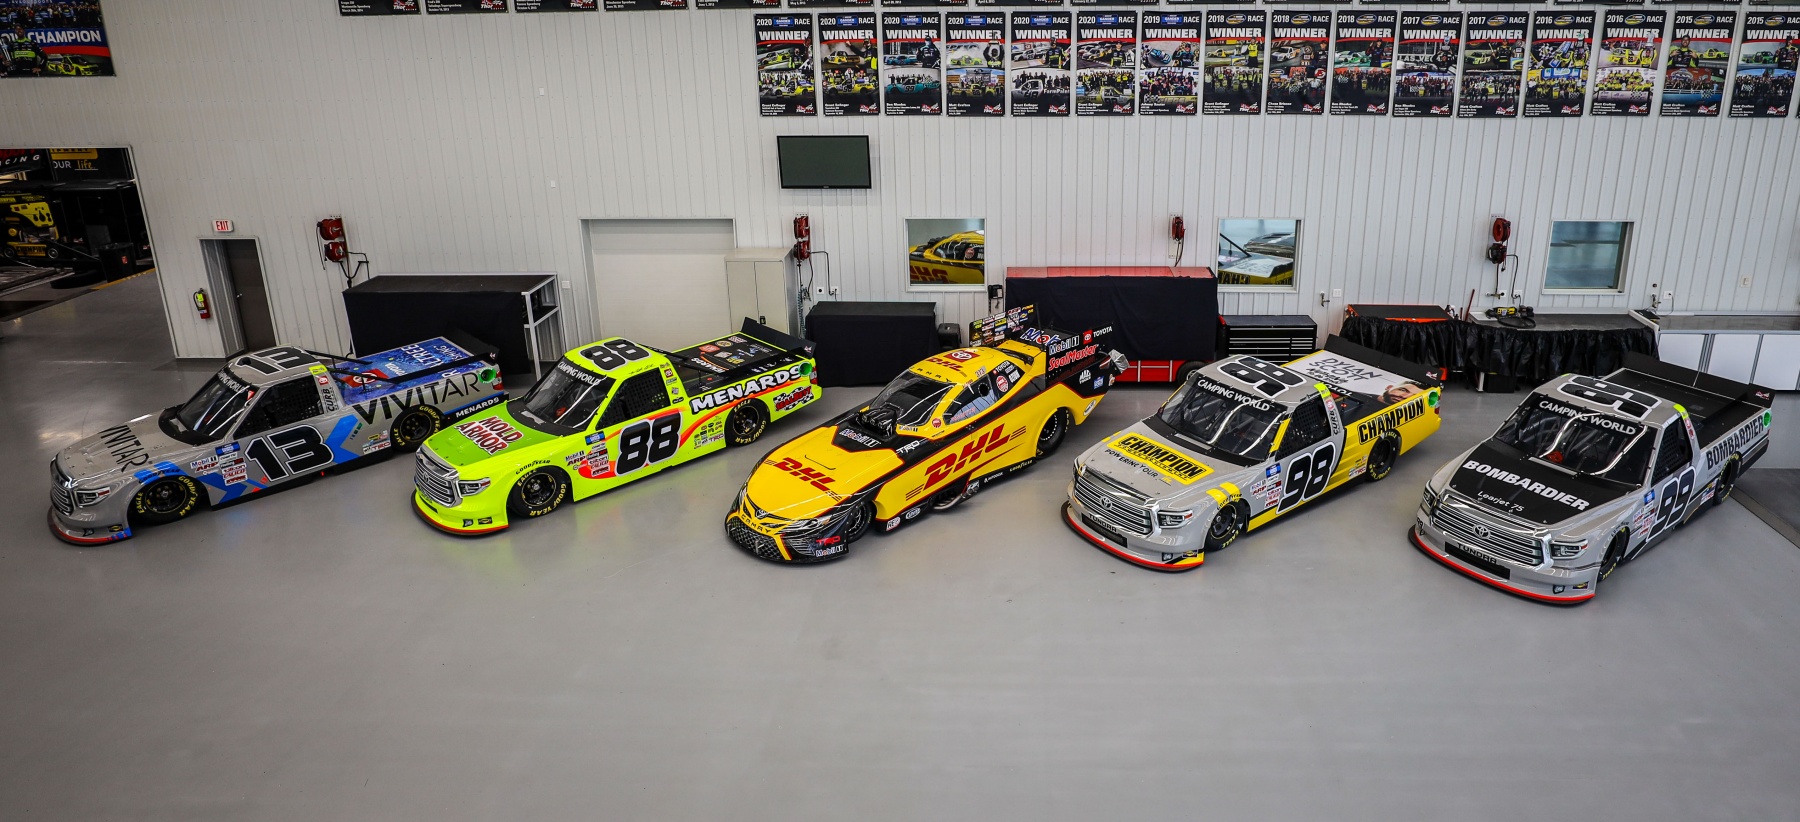 Kalitta Motorsports Welcomes NASCAR Truck Series Team ThorSport Racing Back to Toyota Racing Family Drag Illustrated Drag Racing News, Opinion, Interviews, Photos, Videos and More